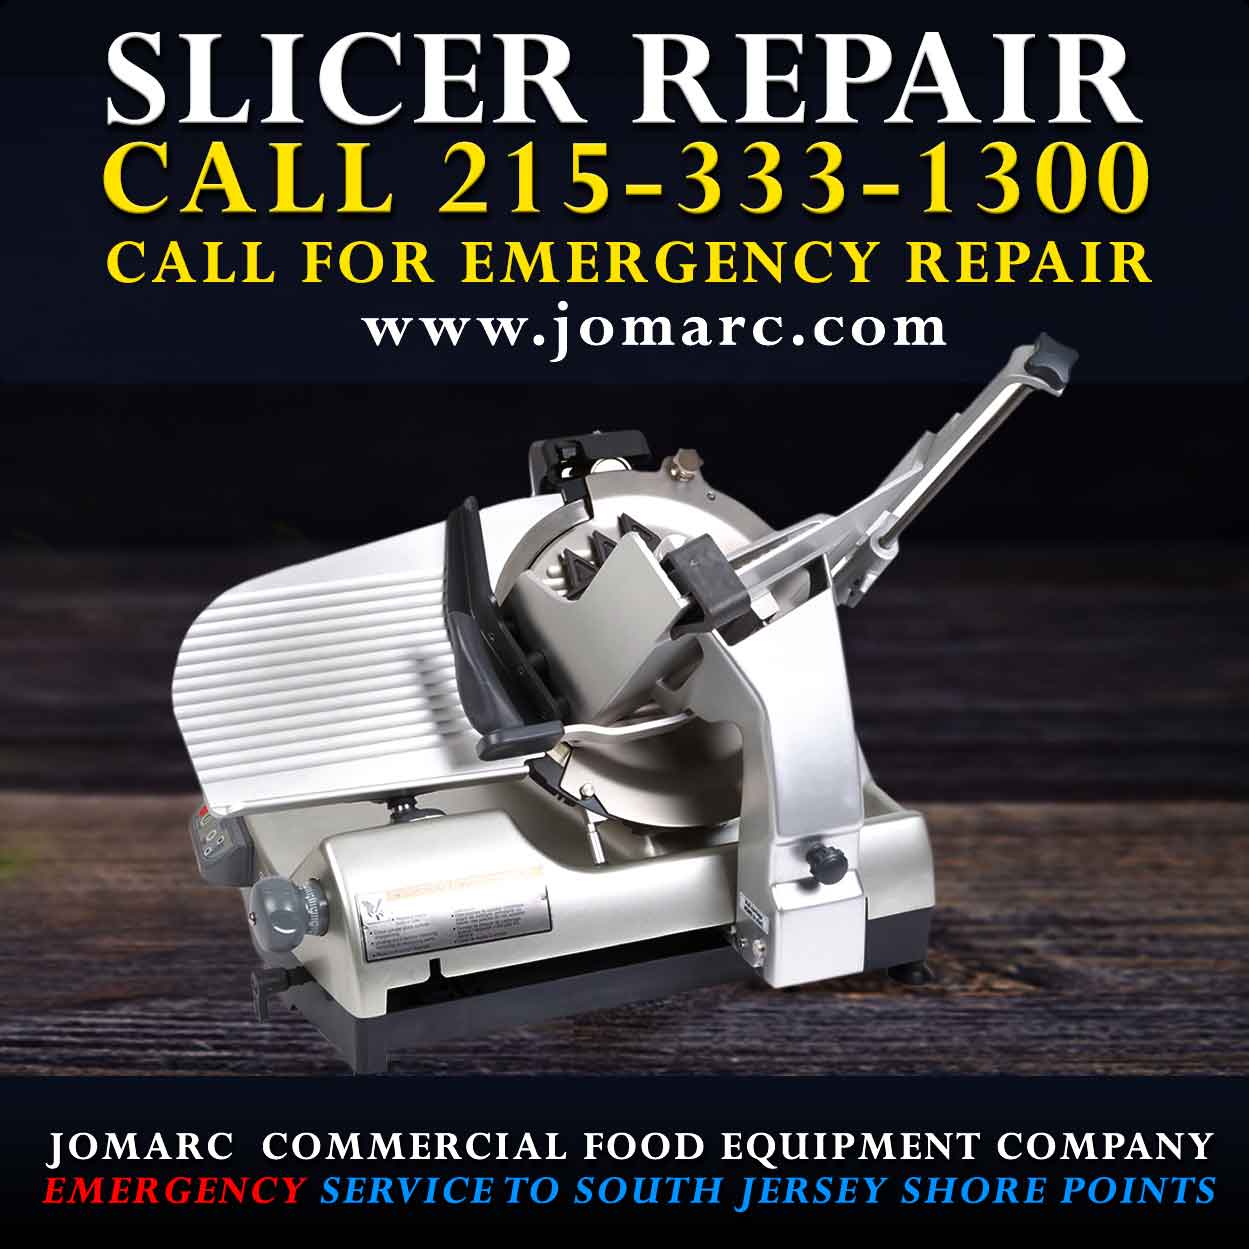 Don’t Wait Until your slicer breaks! We Offer PREVENTIVE MAINTENANCE SERVICE FOR COMMERICAL SLICERS for $149.00

Preventative maintence is required to keep the investment you made in a commercial slicer to continue to operate at maximum efficiency, your business cannot afford to have your slicer working below capacity. If you feel that your slicer is not operating at maximum efficiency, call Jomarc for our preventative Maintenance Service for light duty, medium duty and heavty dutery slicers.